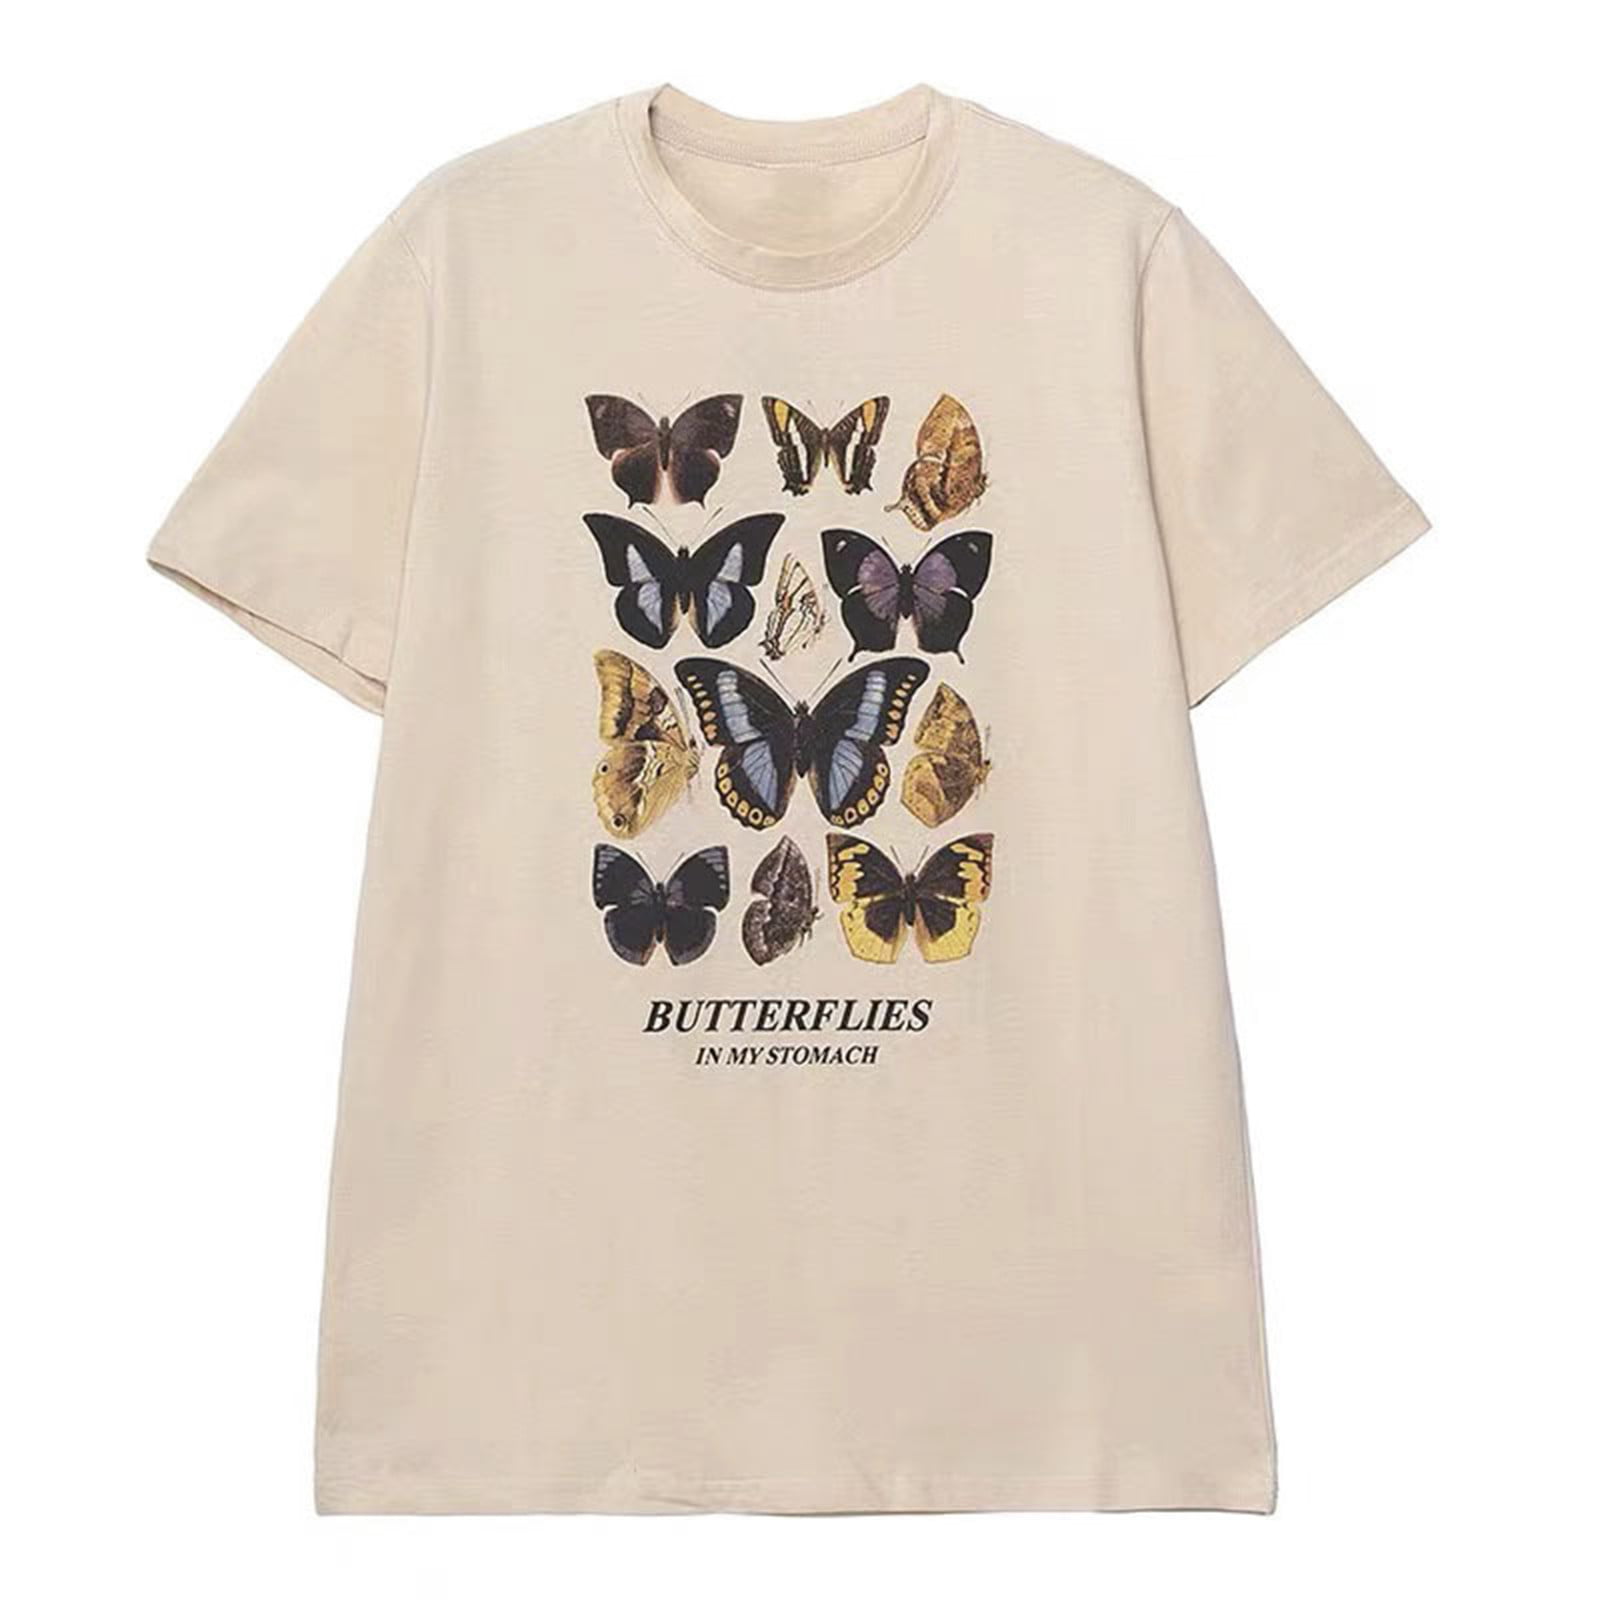 Fridja BUTTERFLIES Sleeve IN Short T-shirt Women Butterfly STOMACH MY Neck Printed Tops Casual T-shirt Pullover Round